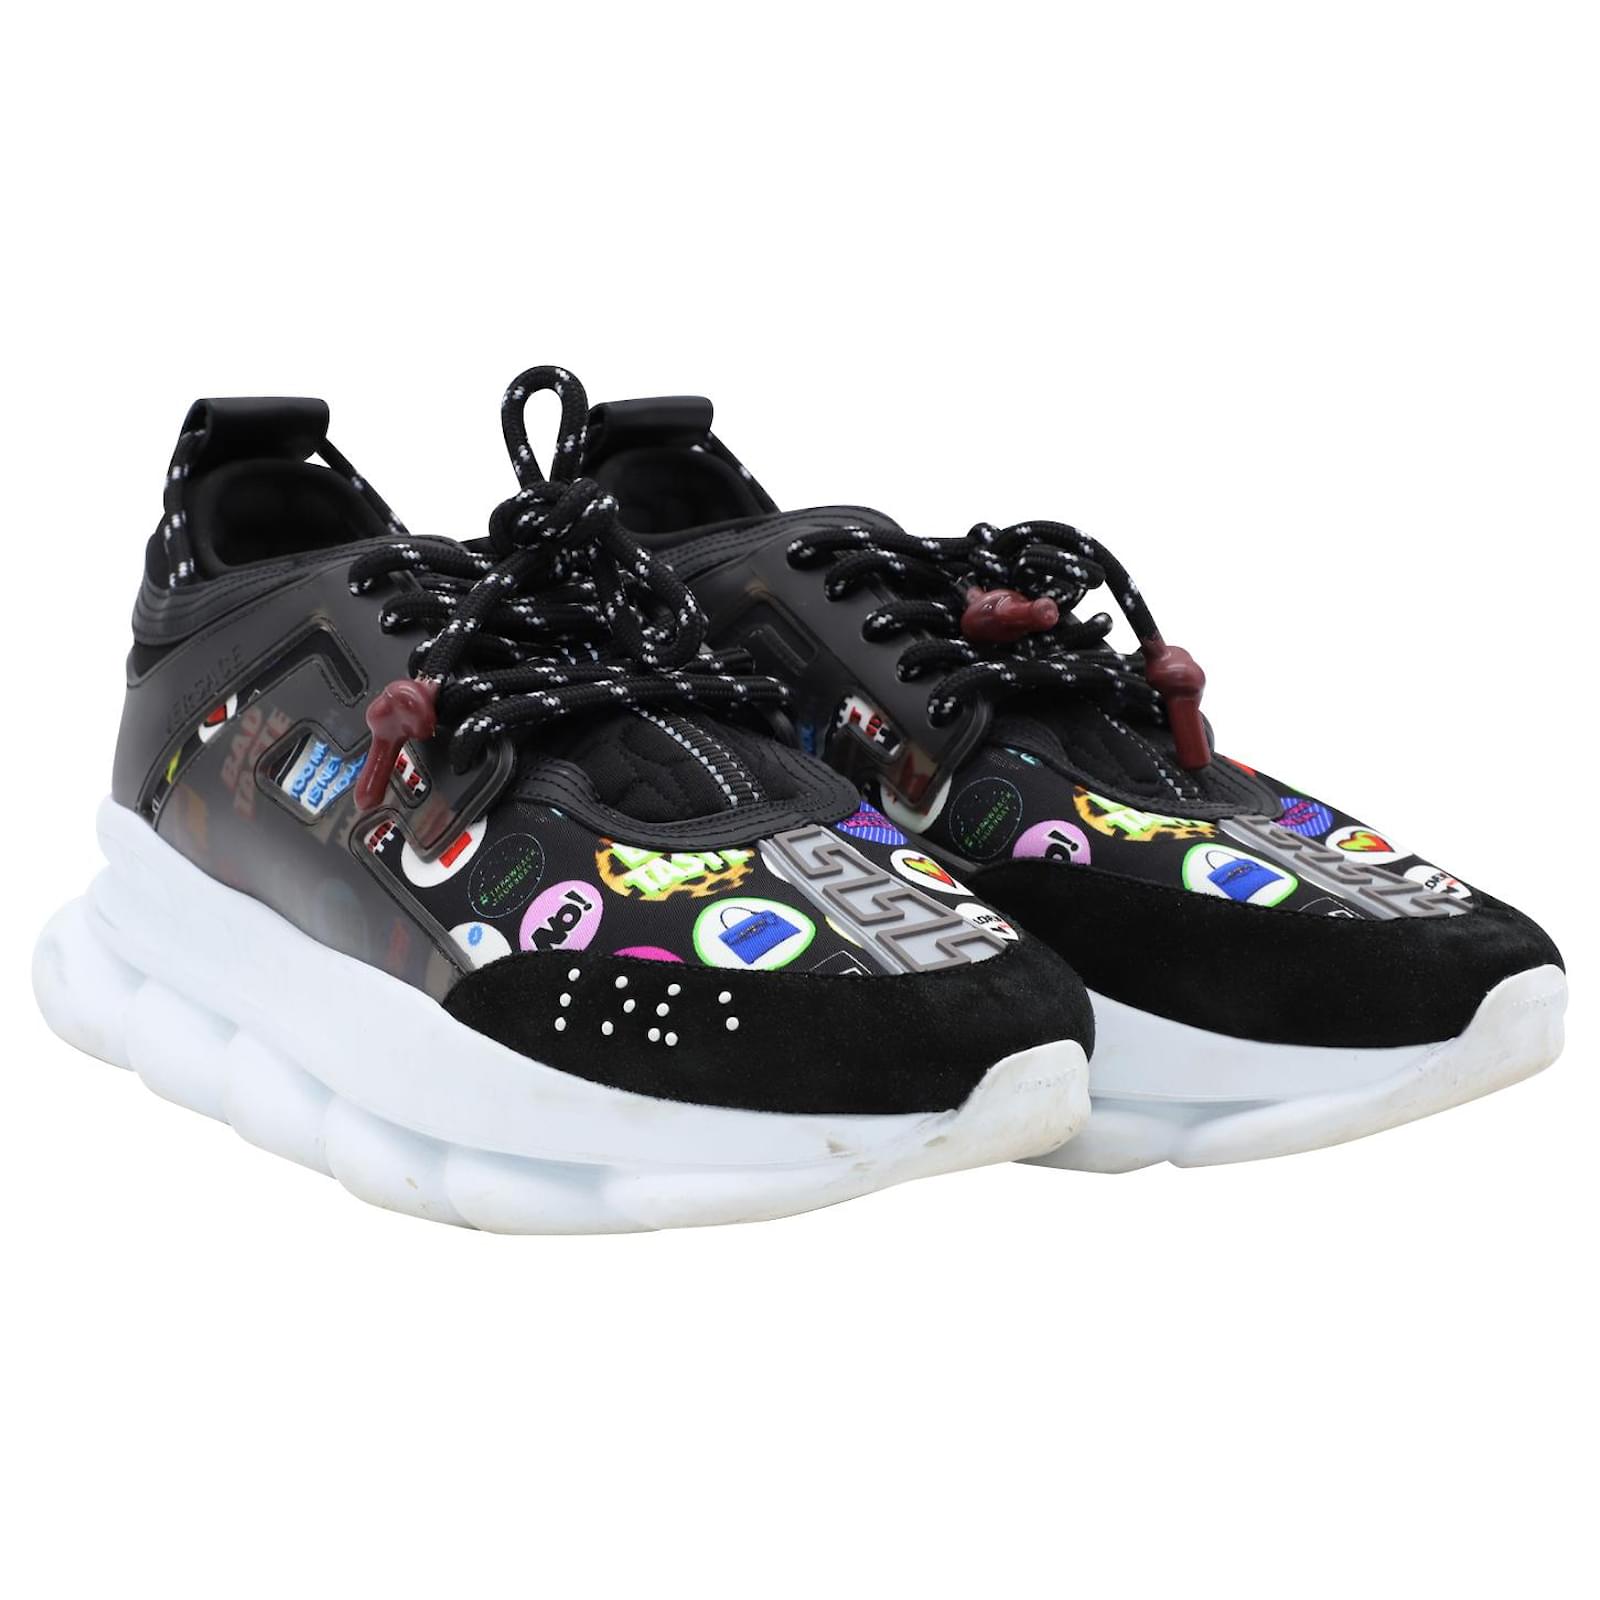 VERSACE CHAIN REACTION SNEAKERS BLACK/BLACK – Enzo Clothing Store